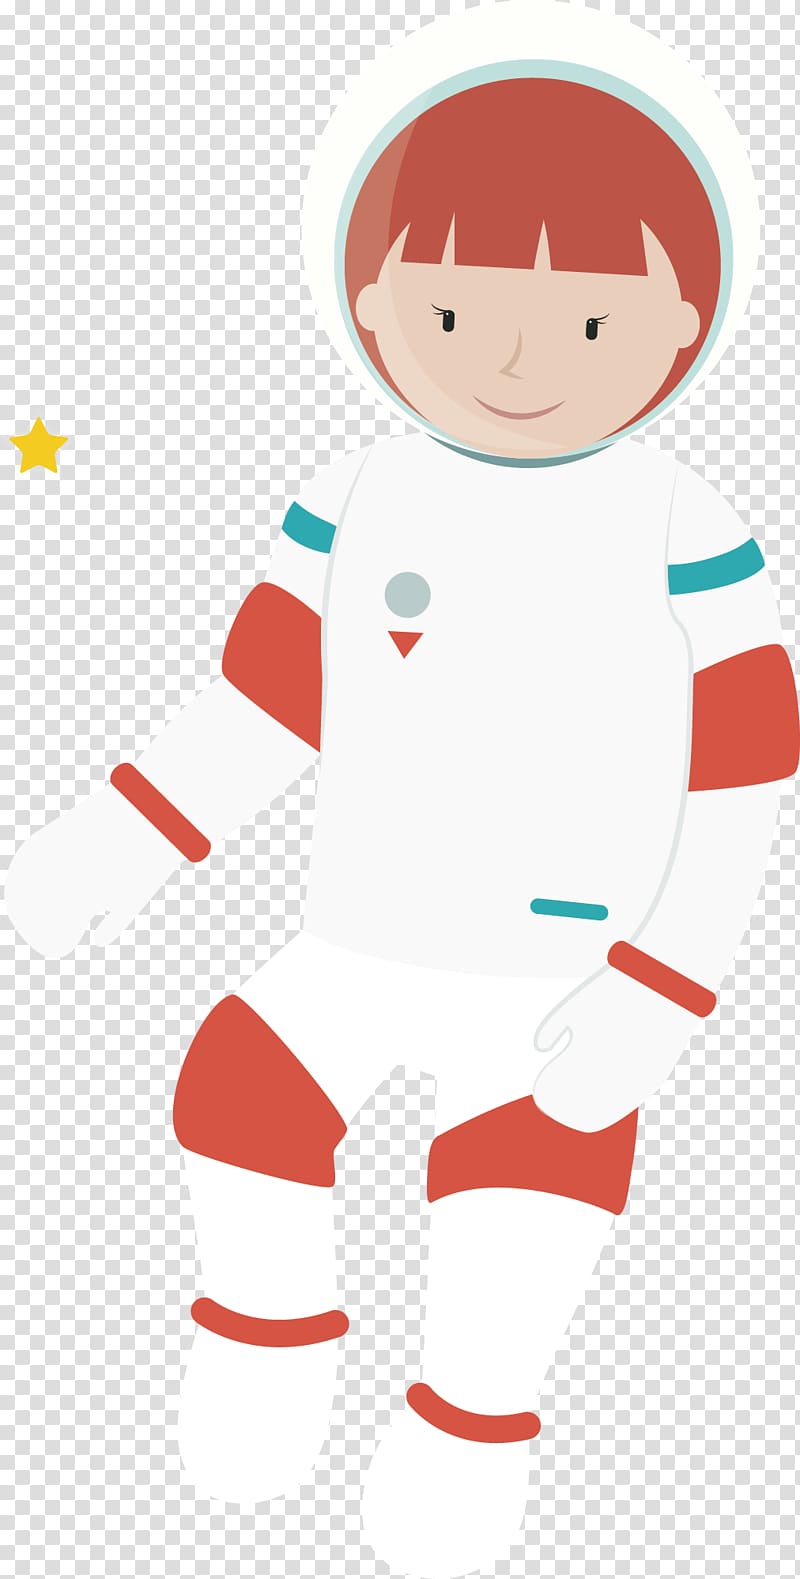 Unidentified flying object Extraterrestrials in fiction Illustration, cartoon astronaut transparent background PNG clipart